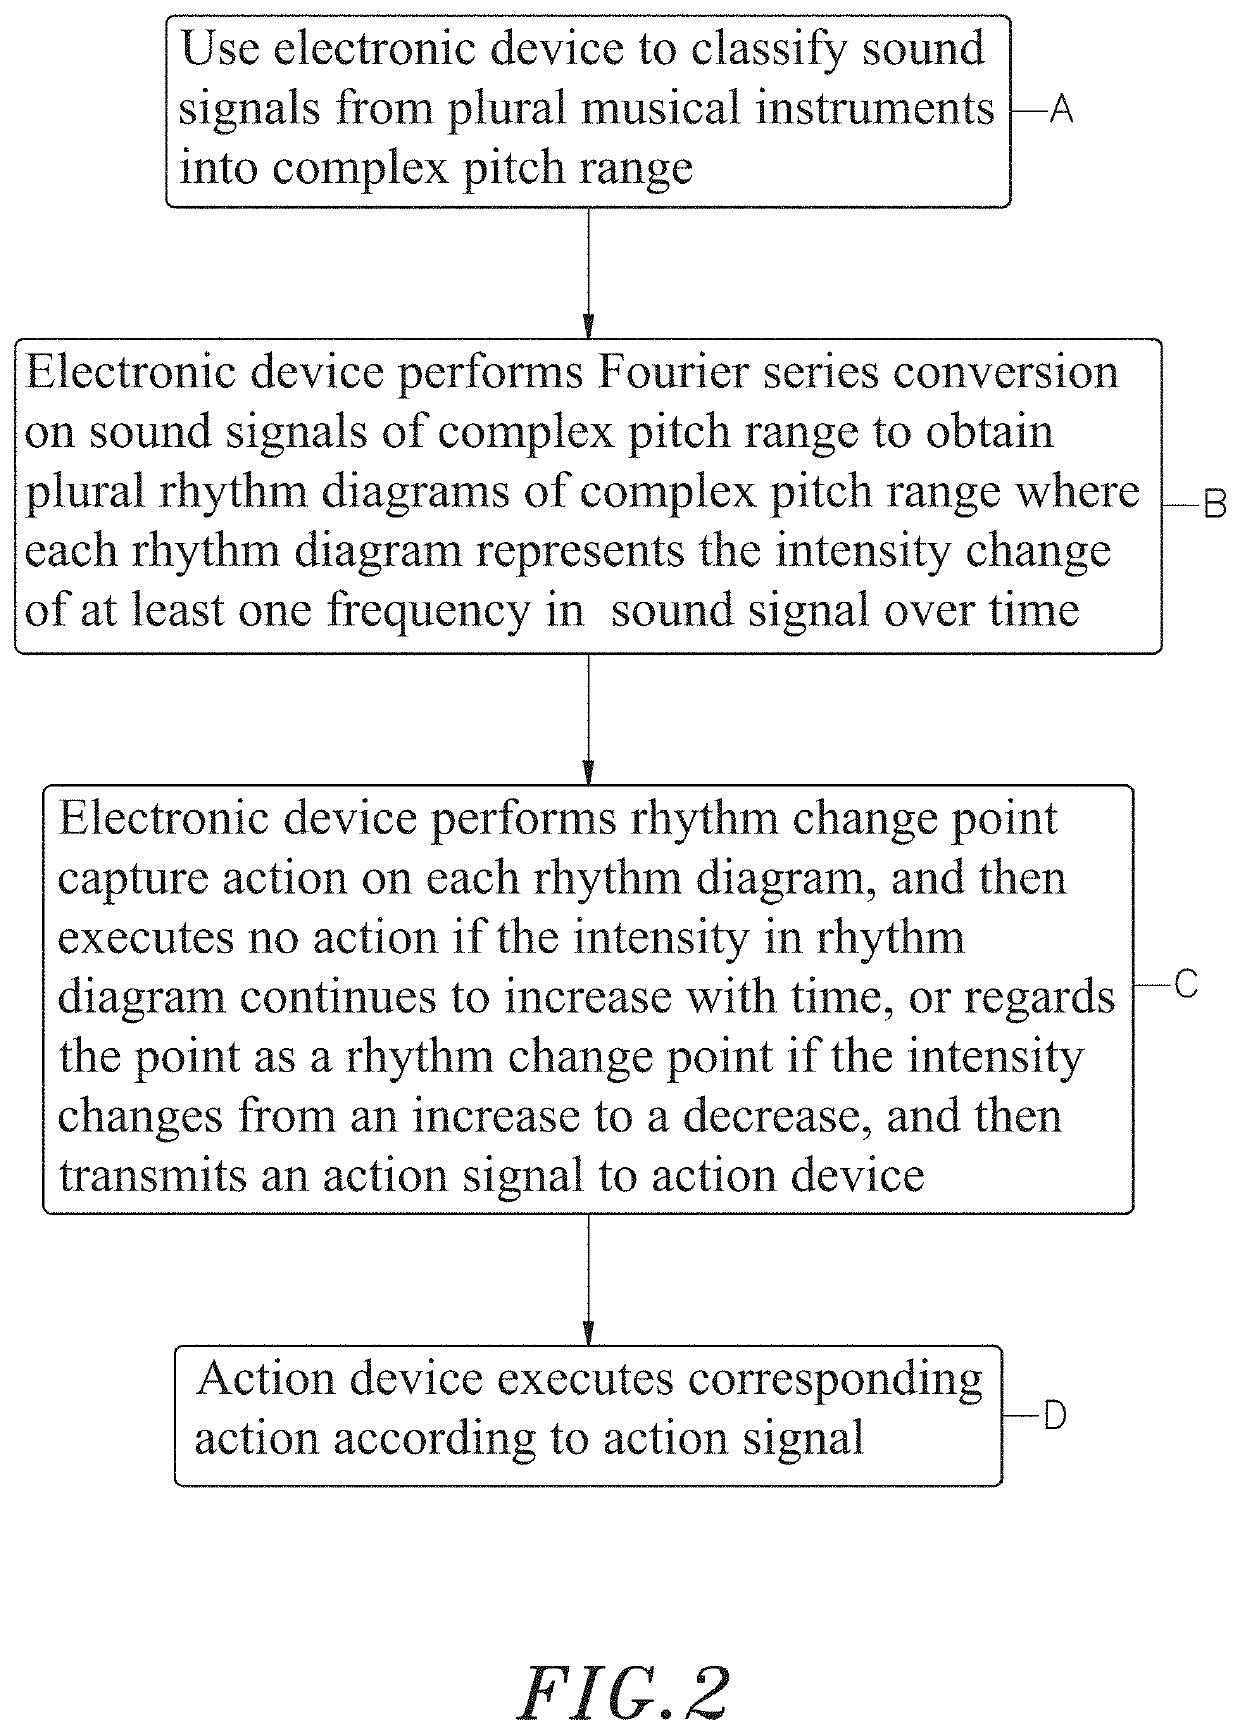 Method of generating actions following the rhythm of music